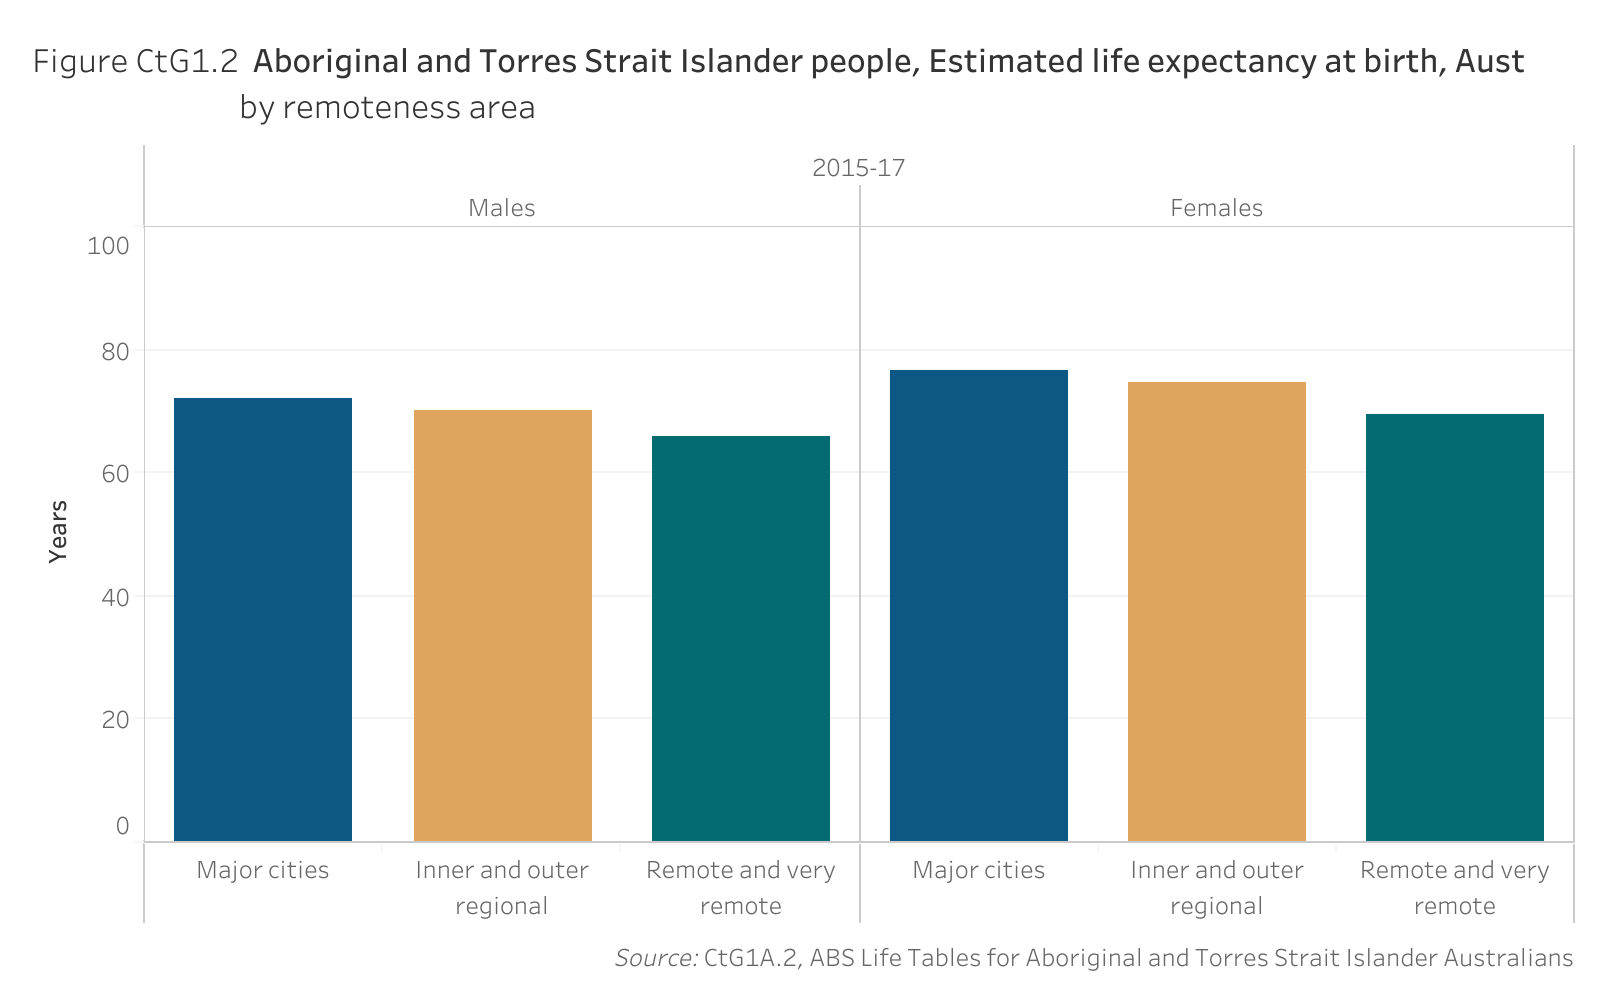 Figure CtG1.2 shows Aboriginal and Torres Strait Islander people, Estimated life expectancy at birth, Australia, by remoteness area. More details can be found within the text near this image.